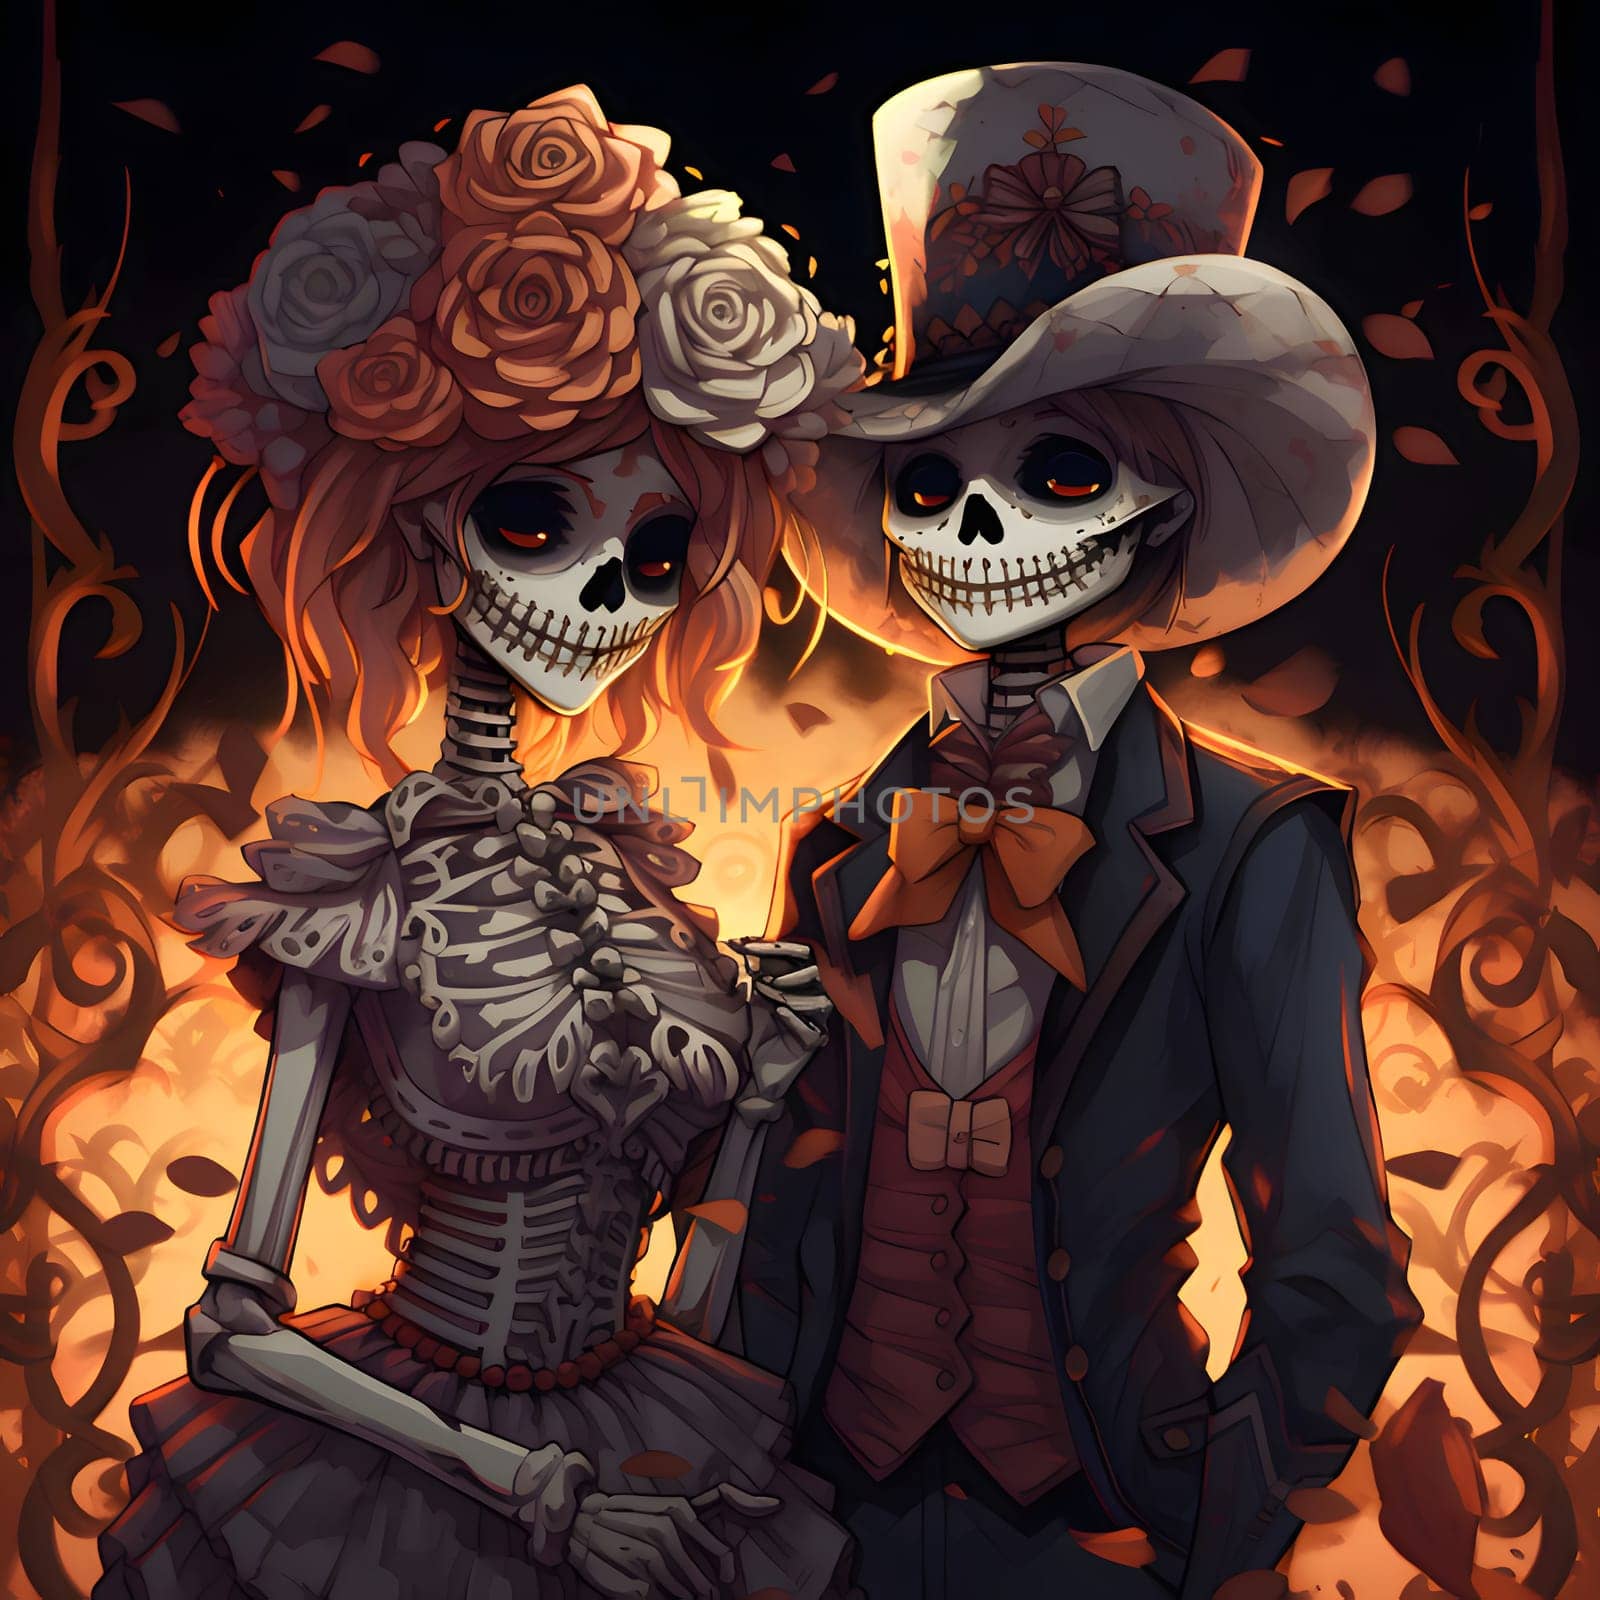 Two elegantly dressed skeletons. For the day of the dead and Halloween. Atmosphere of death and solemnity.